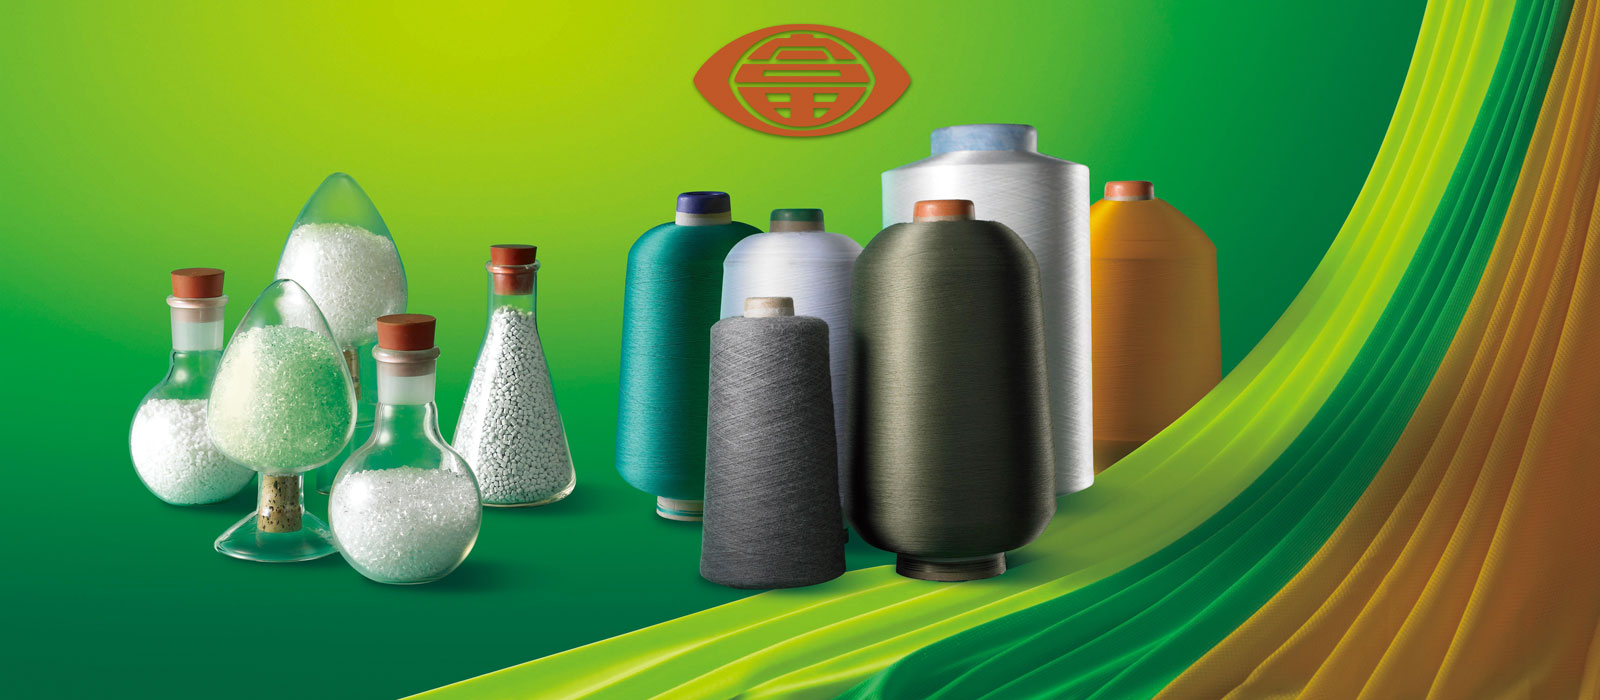 Welcome to the web site of Fu Hsun Fiber Industries Co., Ltd.